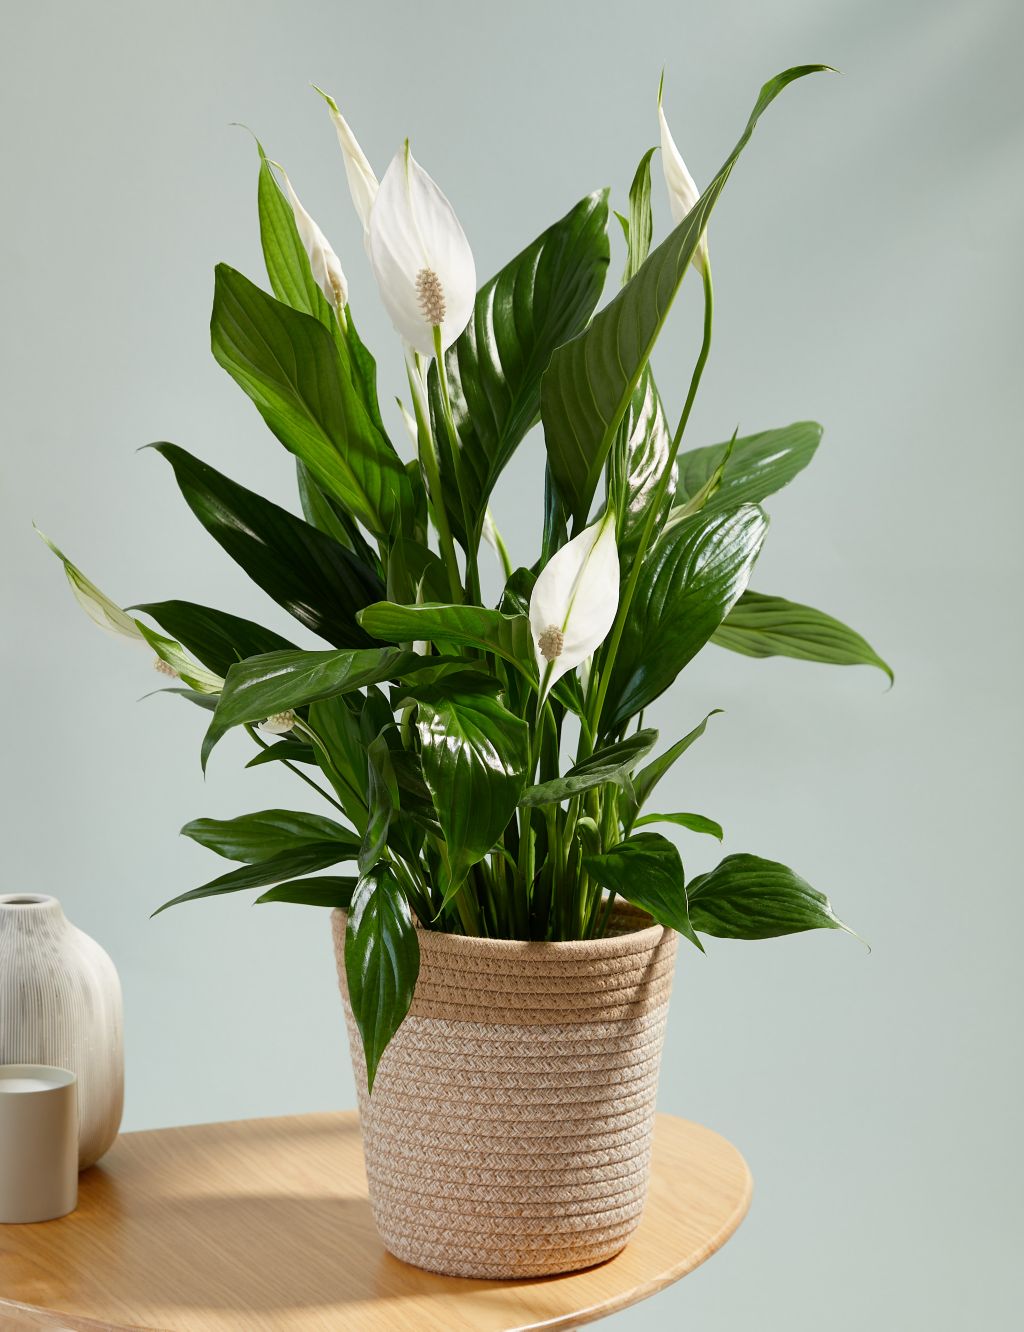 Large Peace Lily in Basket image 1